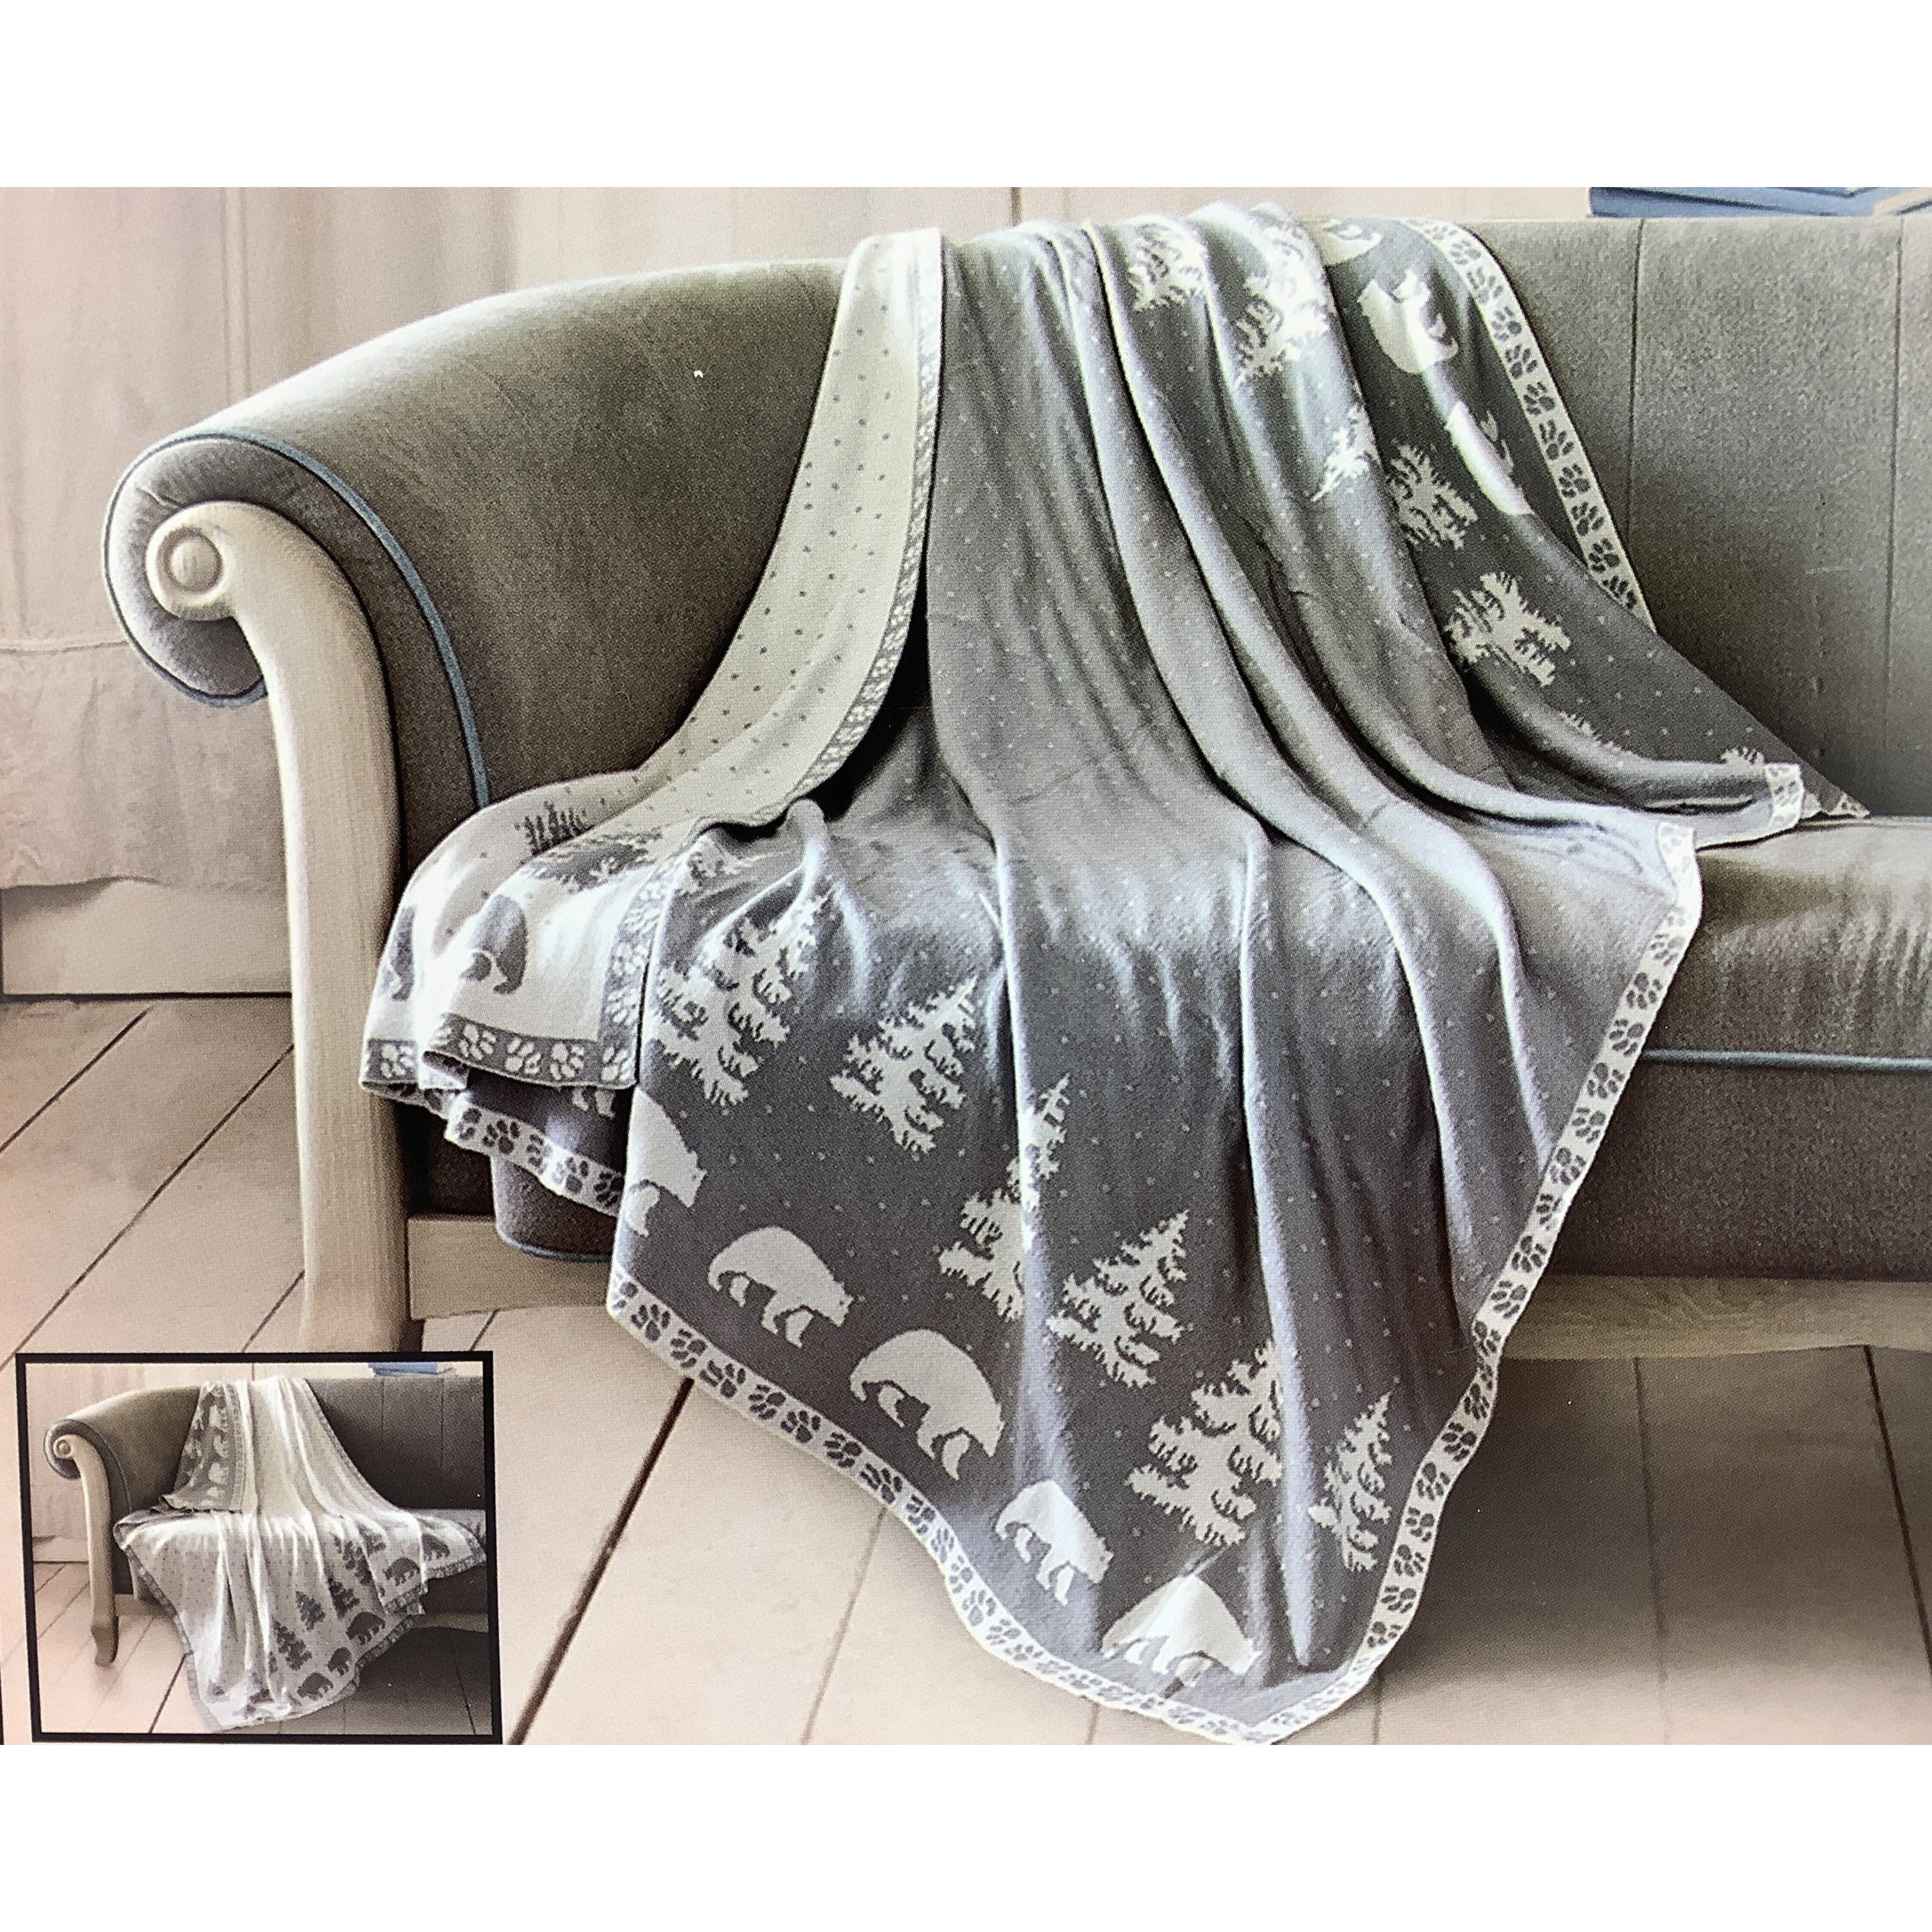 Virah Bella Knitted Throw: Home Decor: Winter Theme: Grey and White